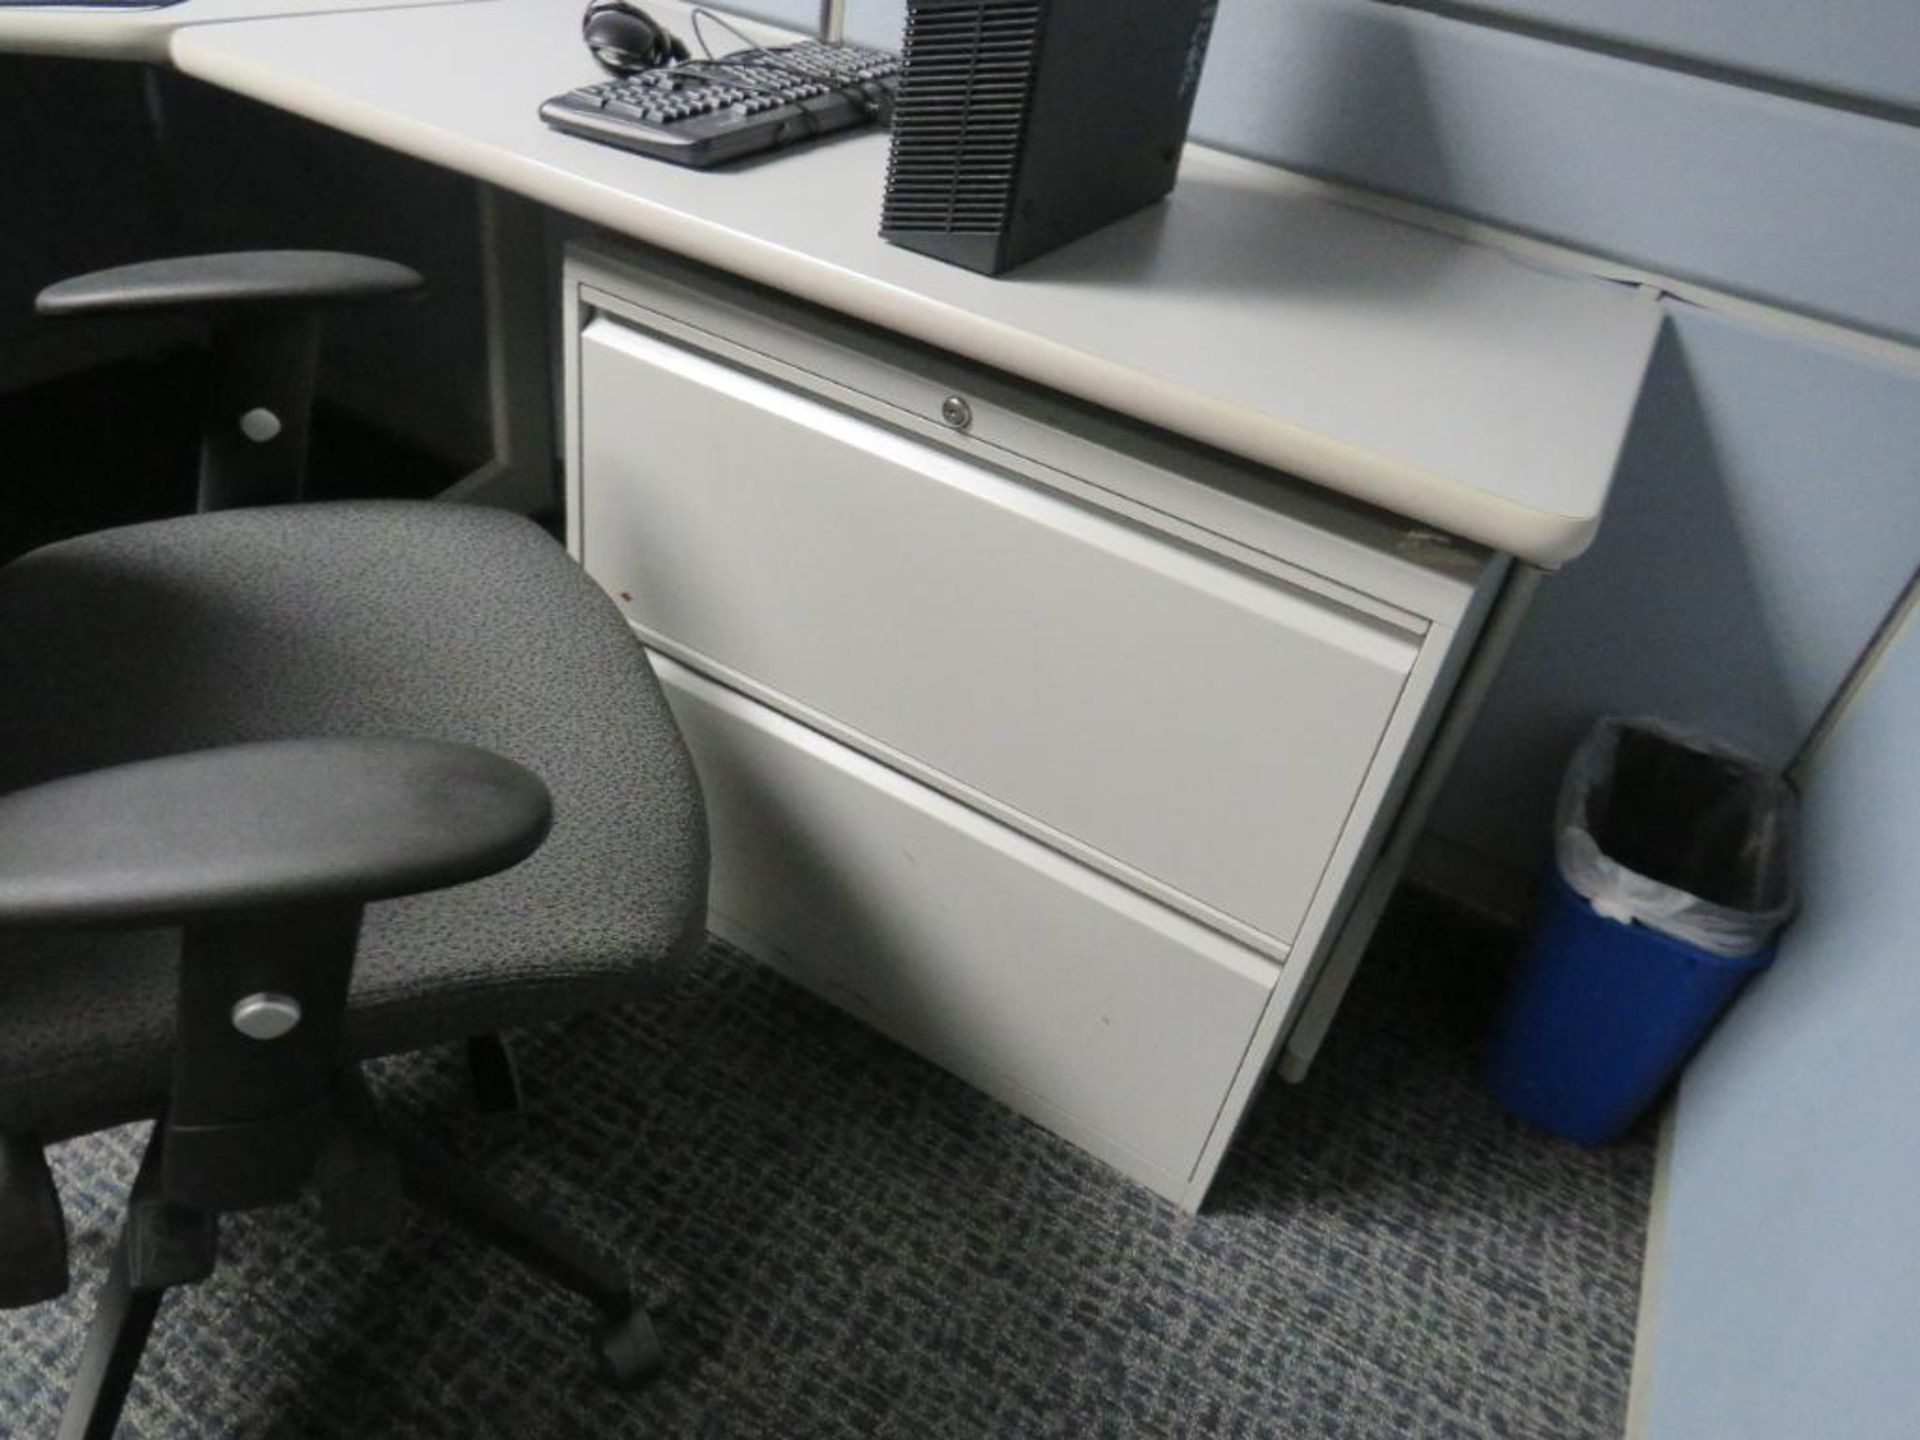 Lot c/o: Large Quantity of Assorted Under Desk File Cabinets - Image 2 of 7